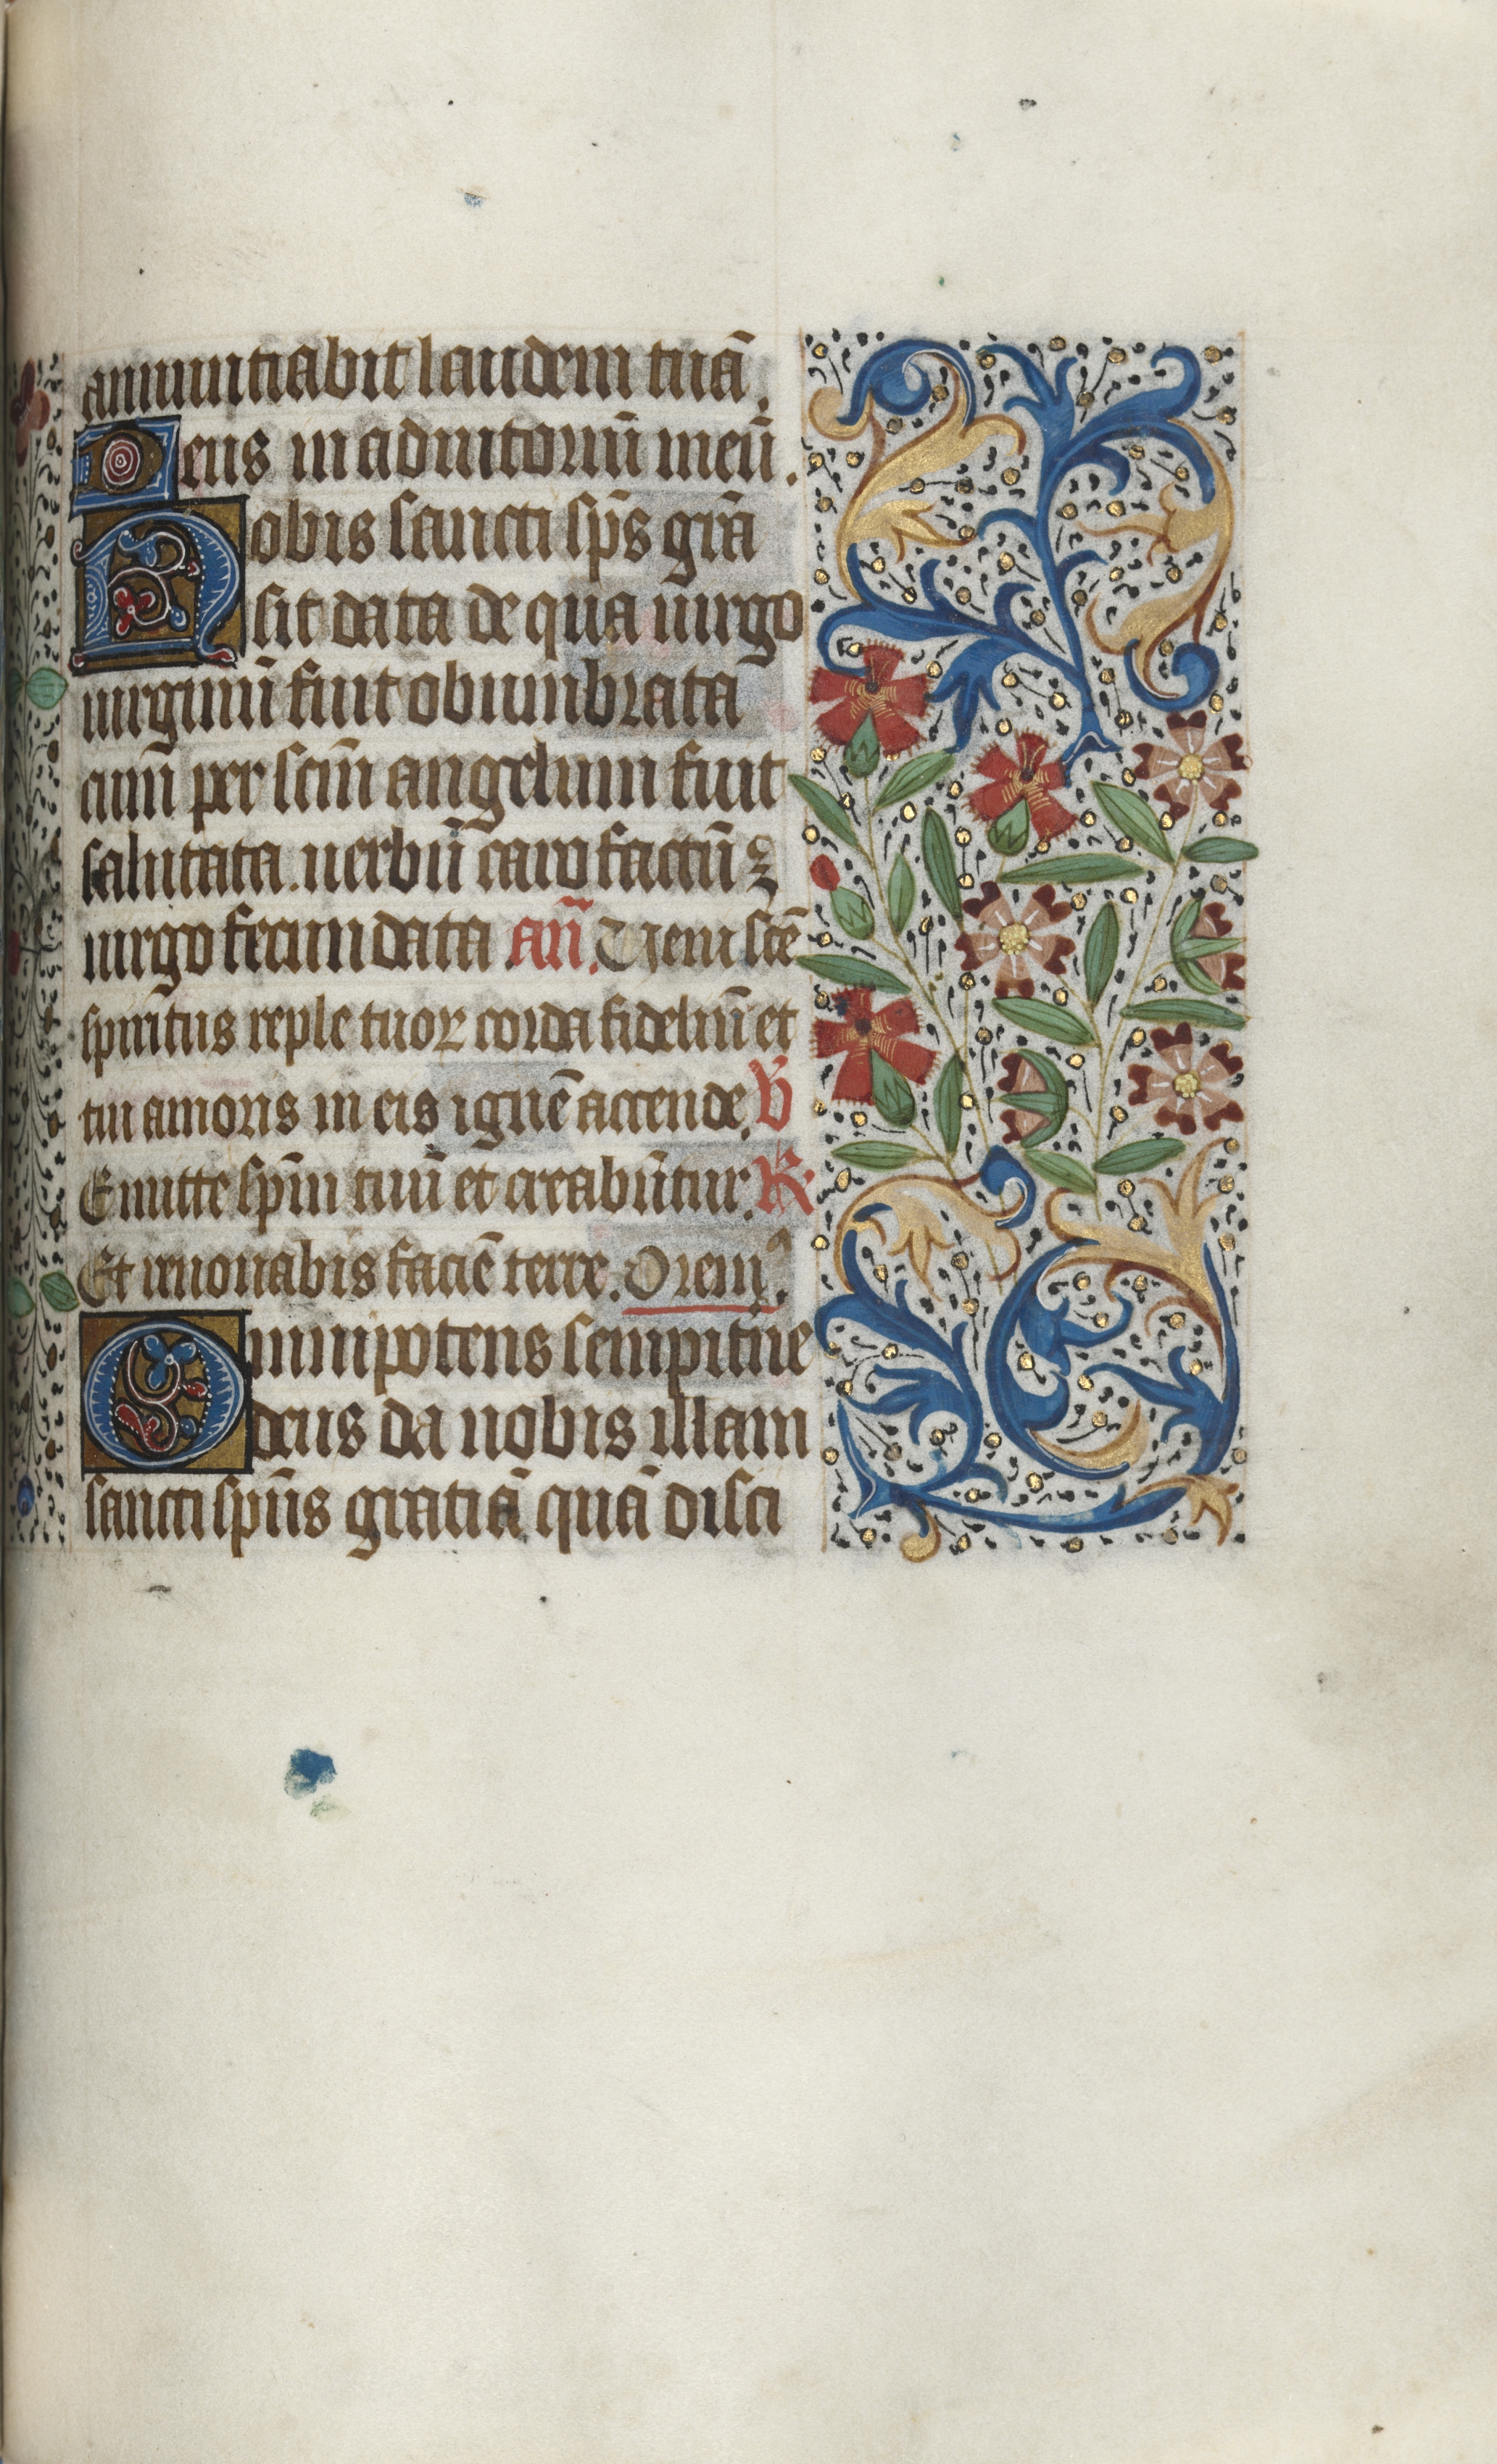 Book of Hours (Use of Rouen): fol. 100r